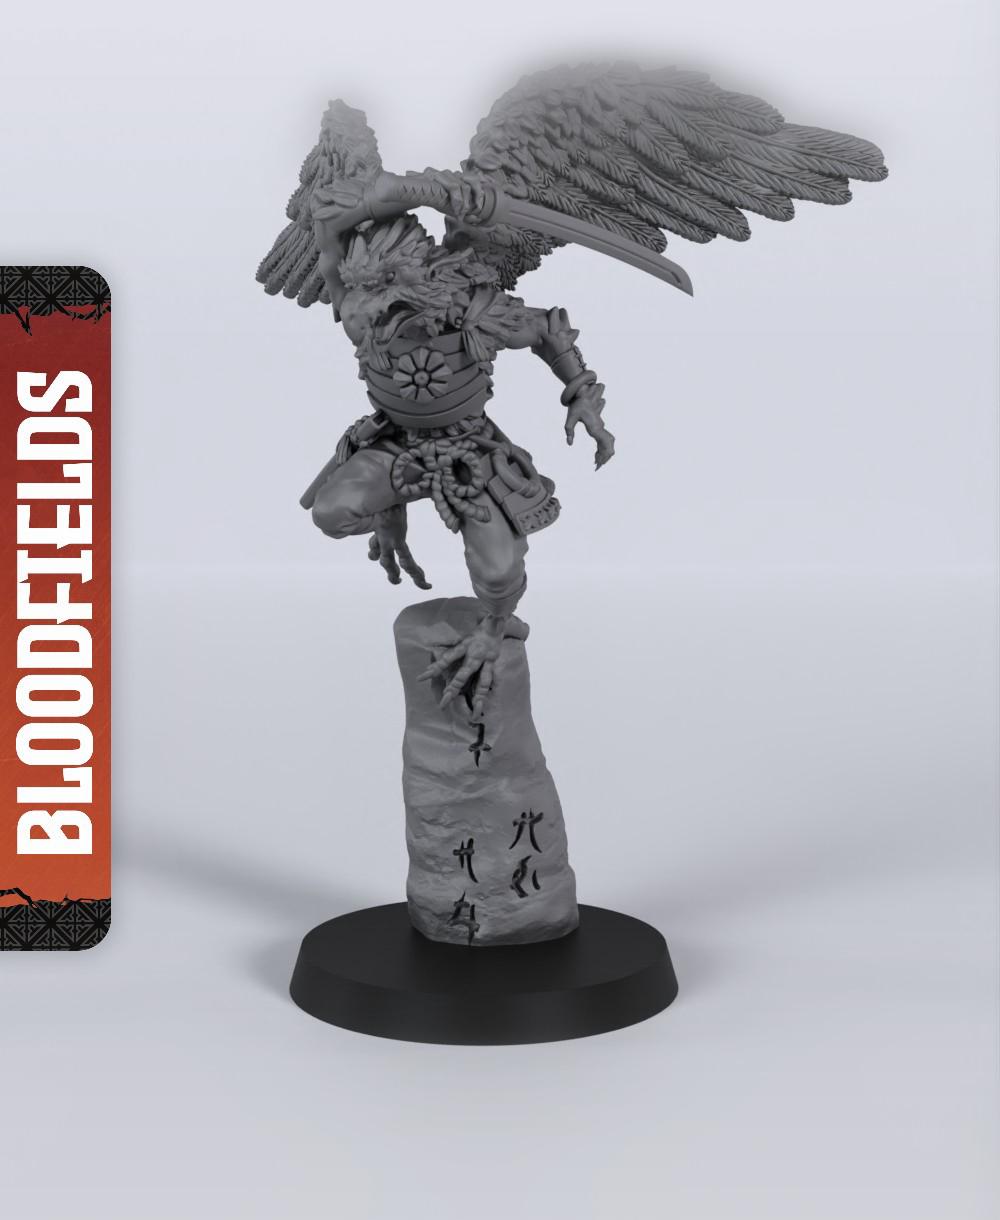 Tengu - With Free Dragon Warhammer - 5e DnD Inspired for RPG and Wargamers 3d model